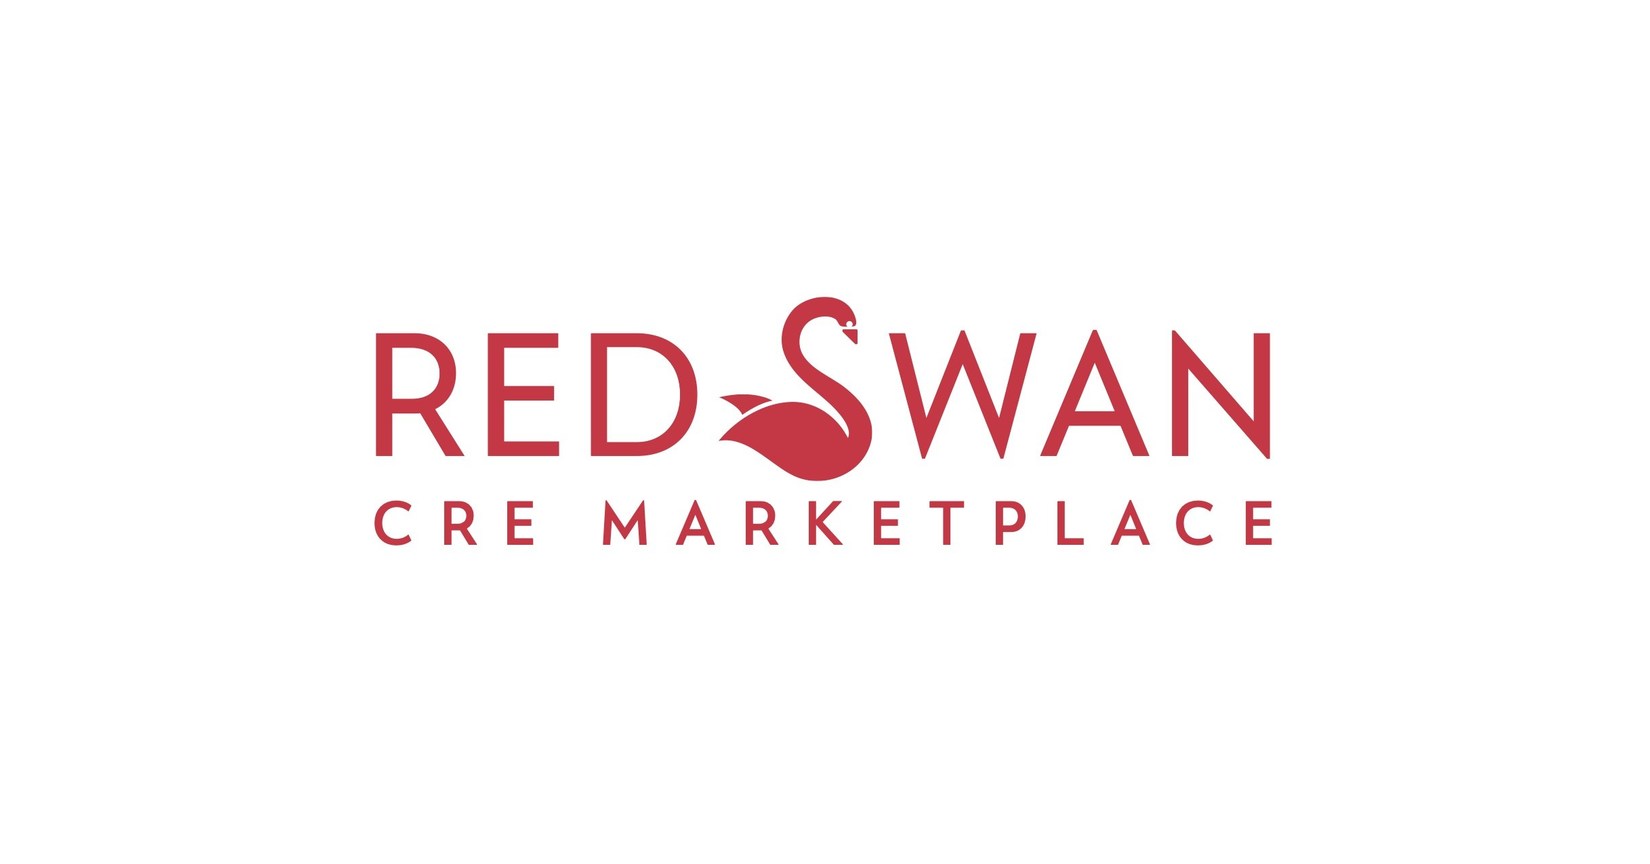 RedSwan Opens First Tranche of Commercial Estate Investors